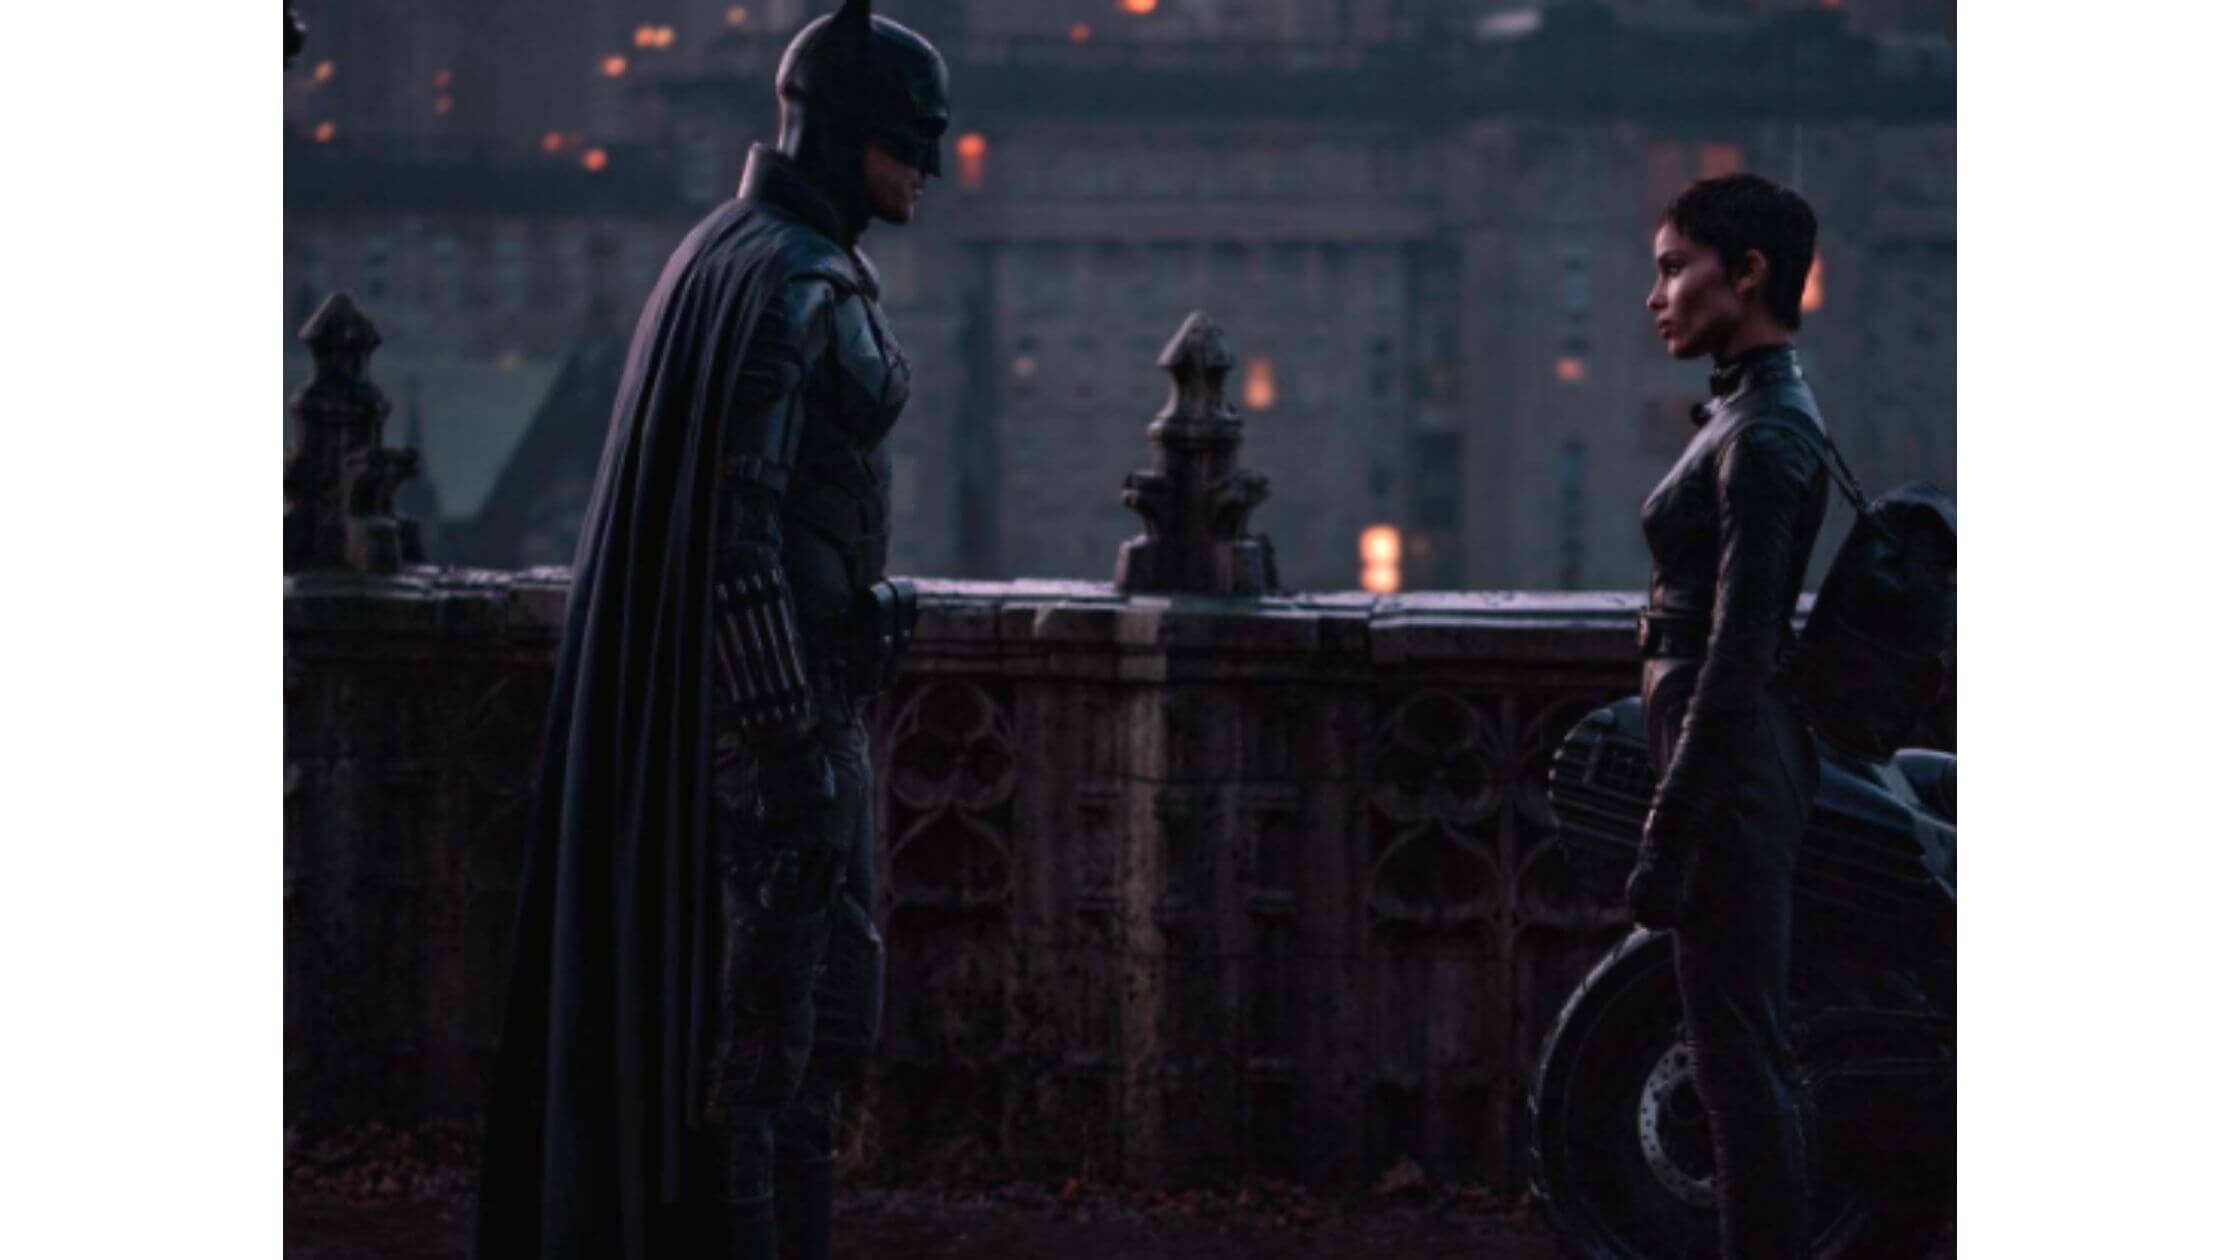 ‘The-Batman-Delivers-A-Whopping-258.2-Million-At-The-Box-Office-Becoming-The-Second-Best-Opening-Since-2019-1